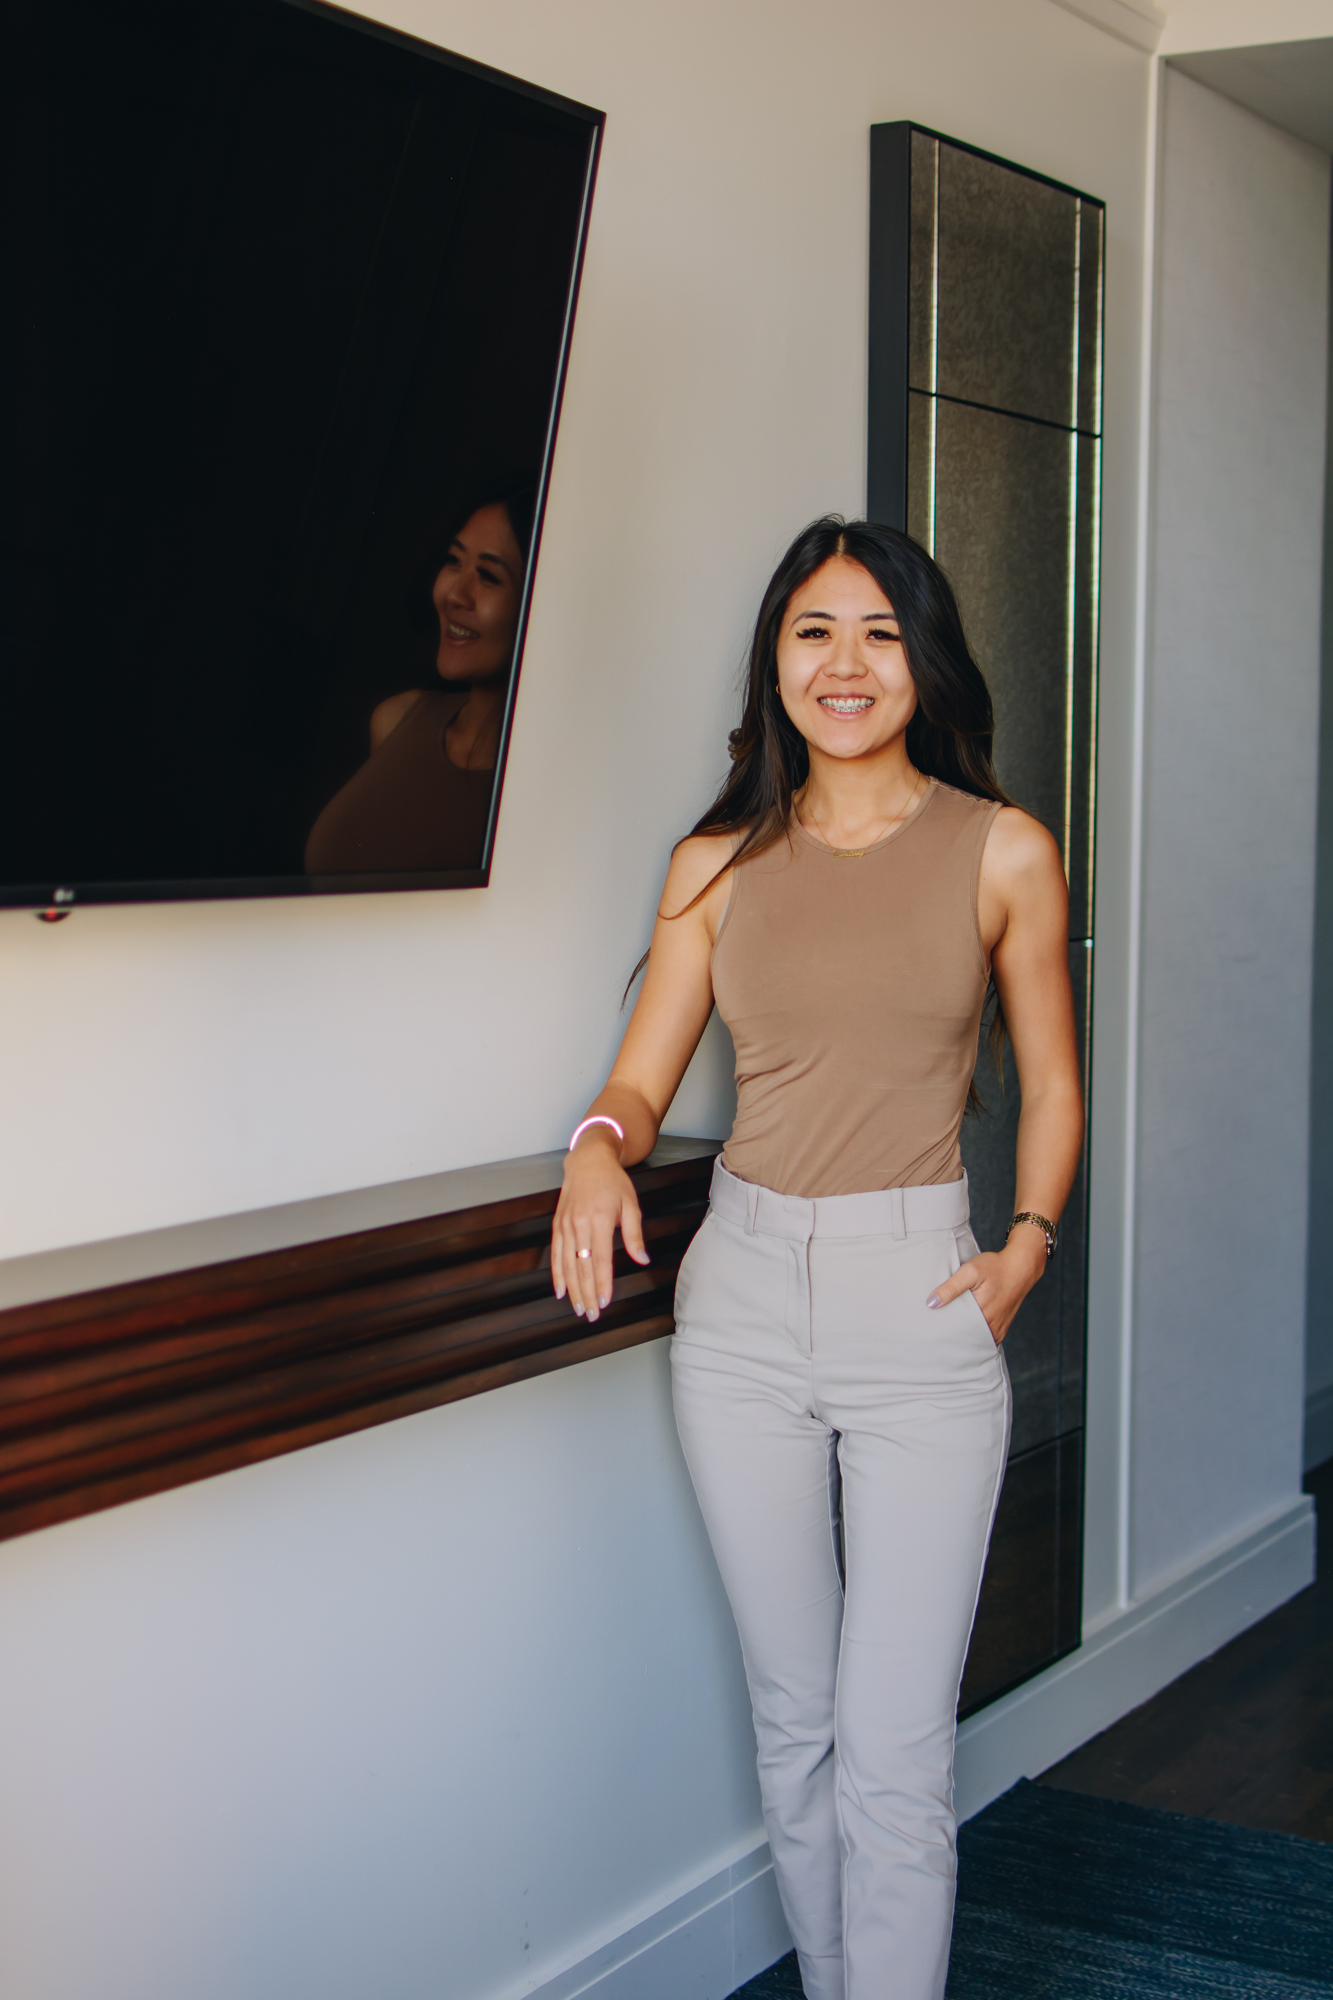 Lifestyle influencer Demi Bang shares what she wore to a marketing conference for account service.